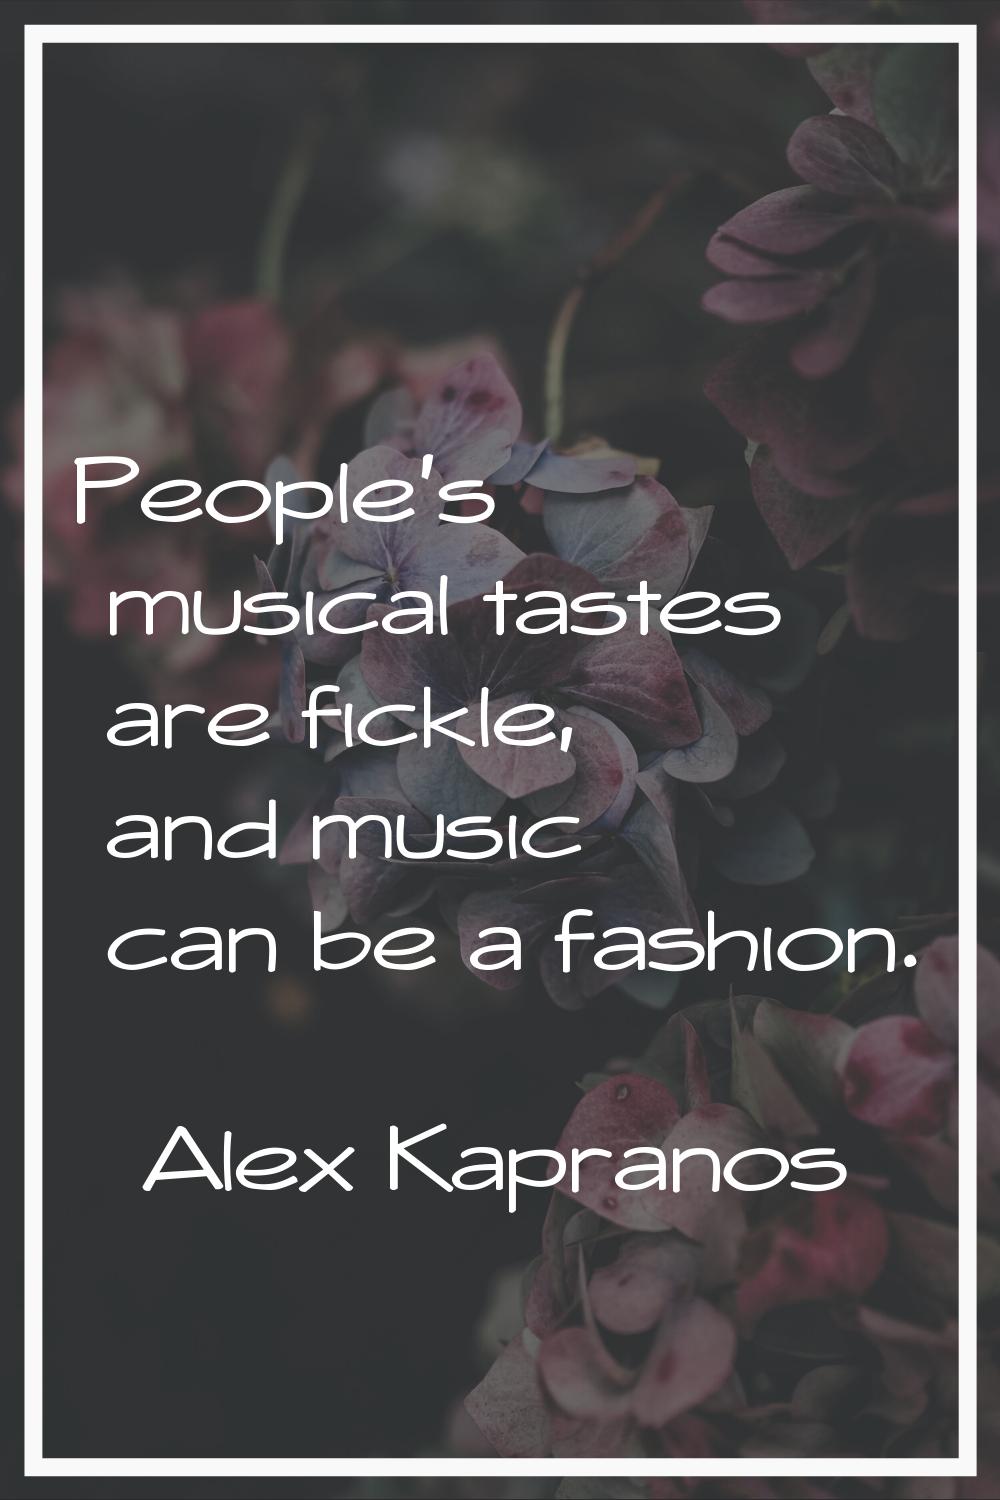 People's musical tastes are fickle, and music can be a fashion.